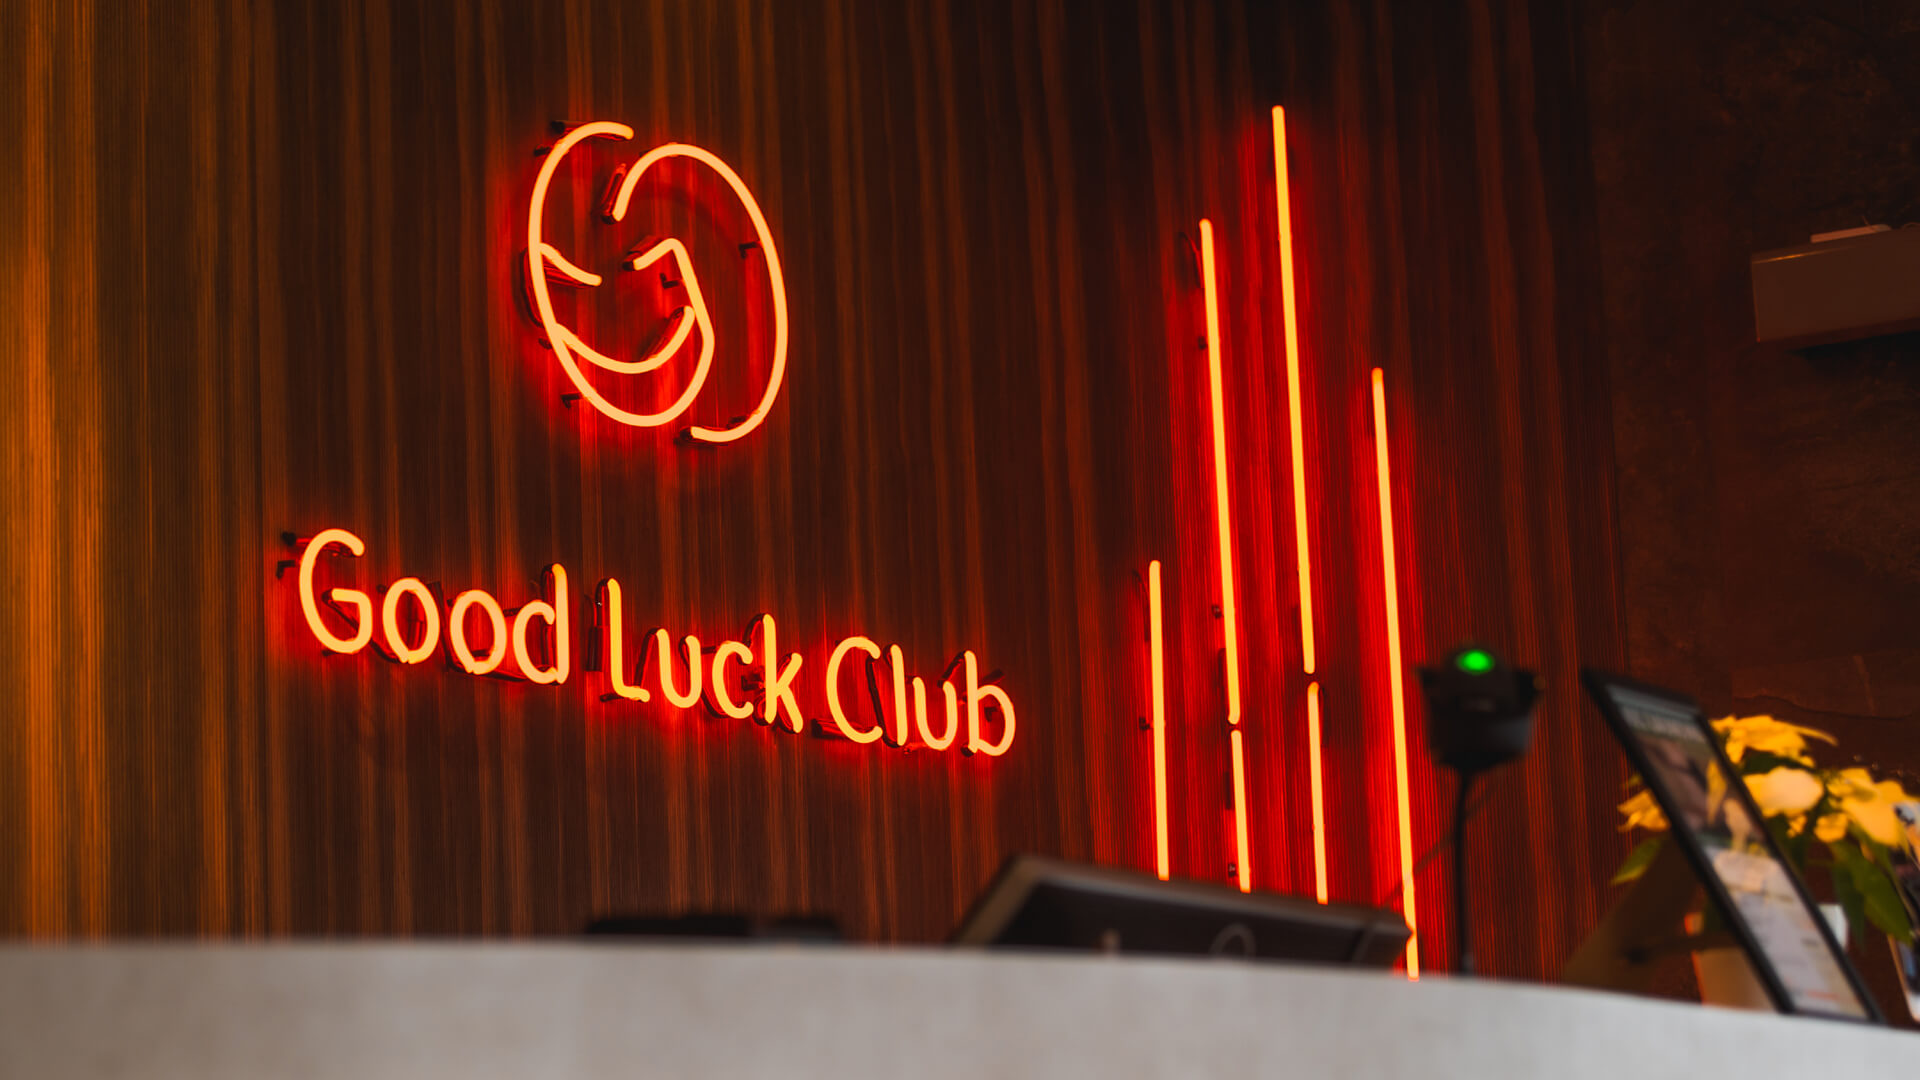 Good Luck Club - A red neon sign in the reception area along with the company logo.